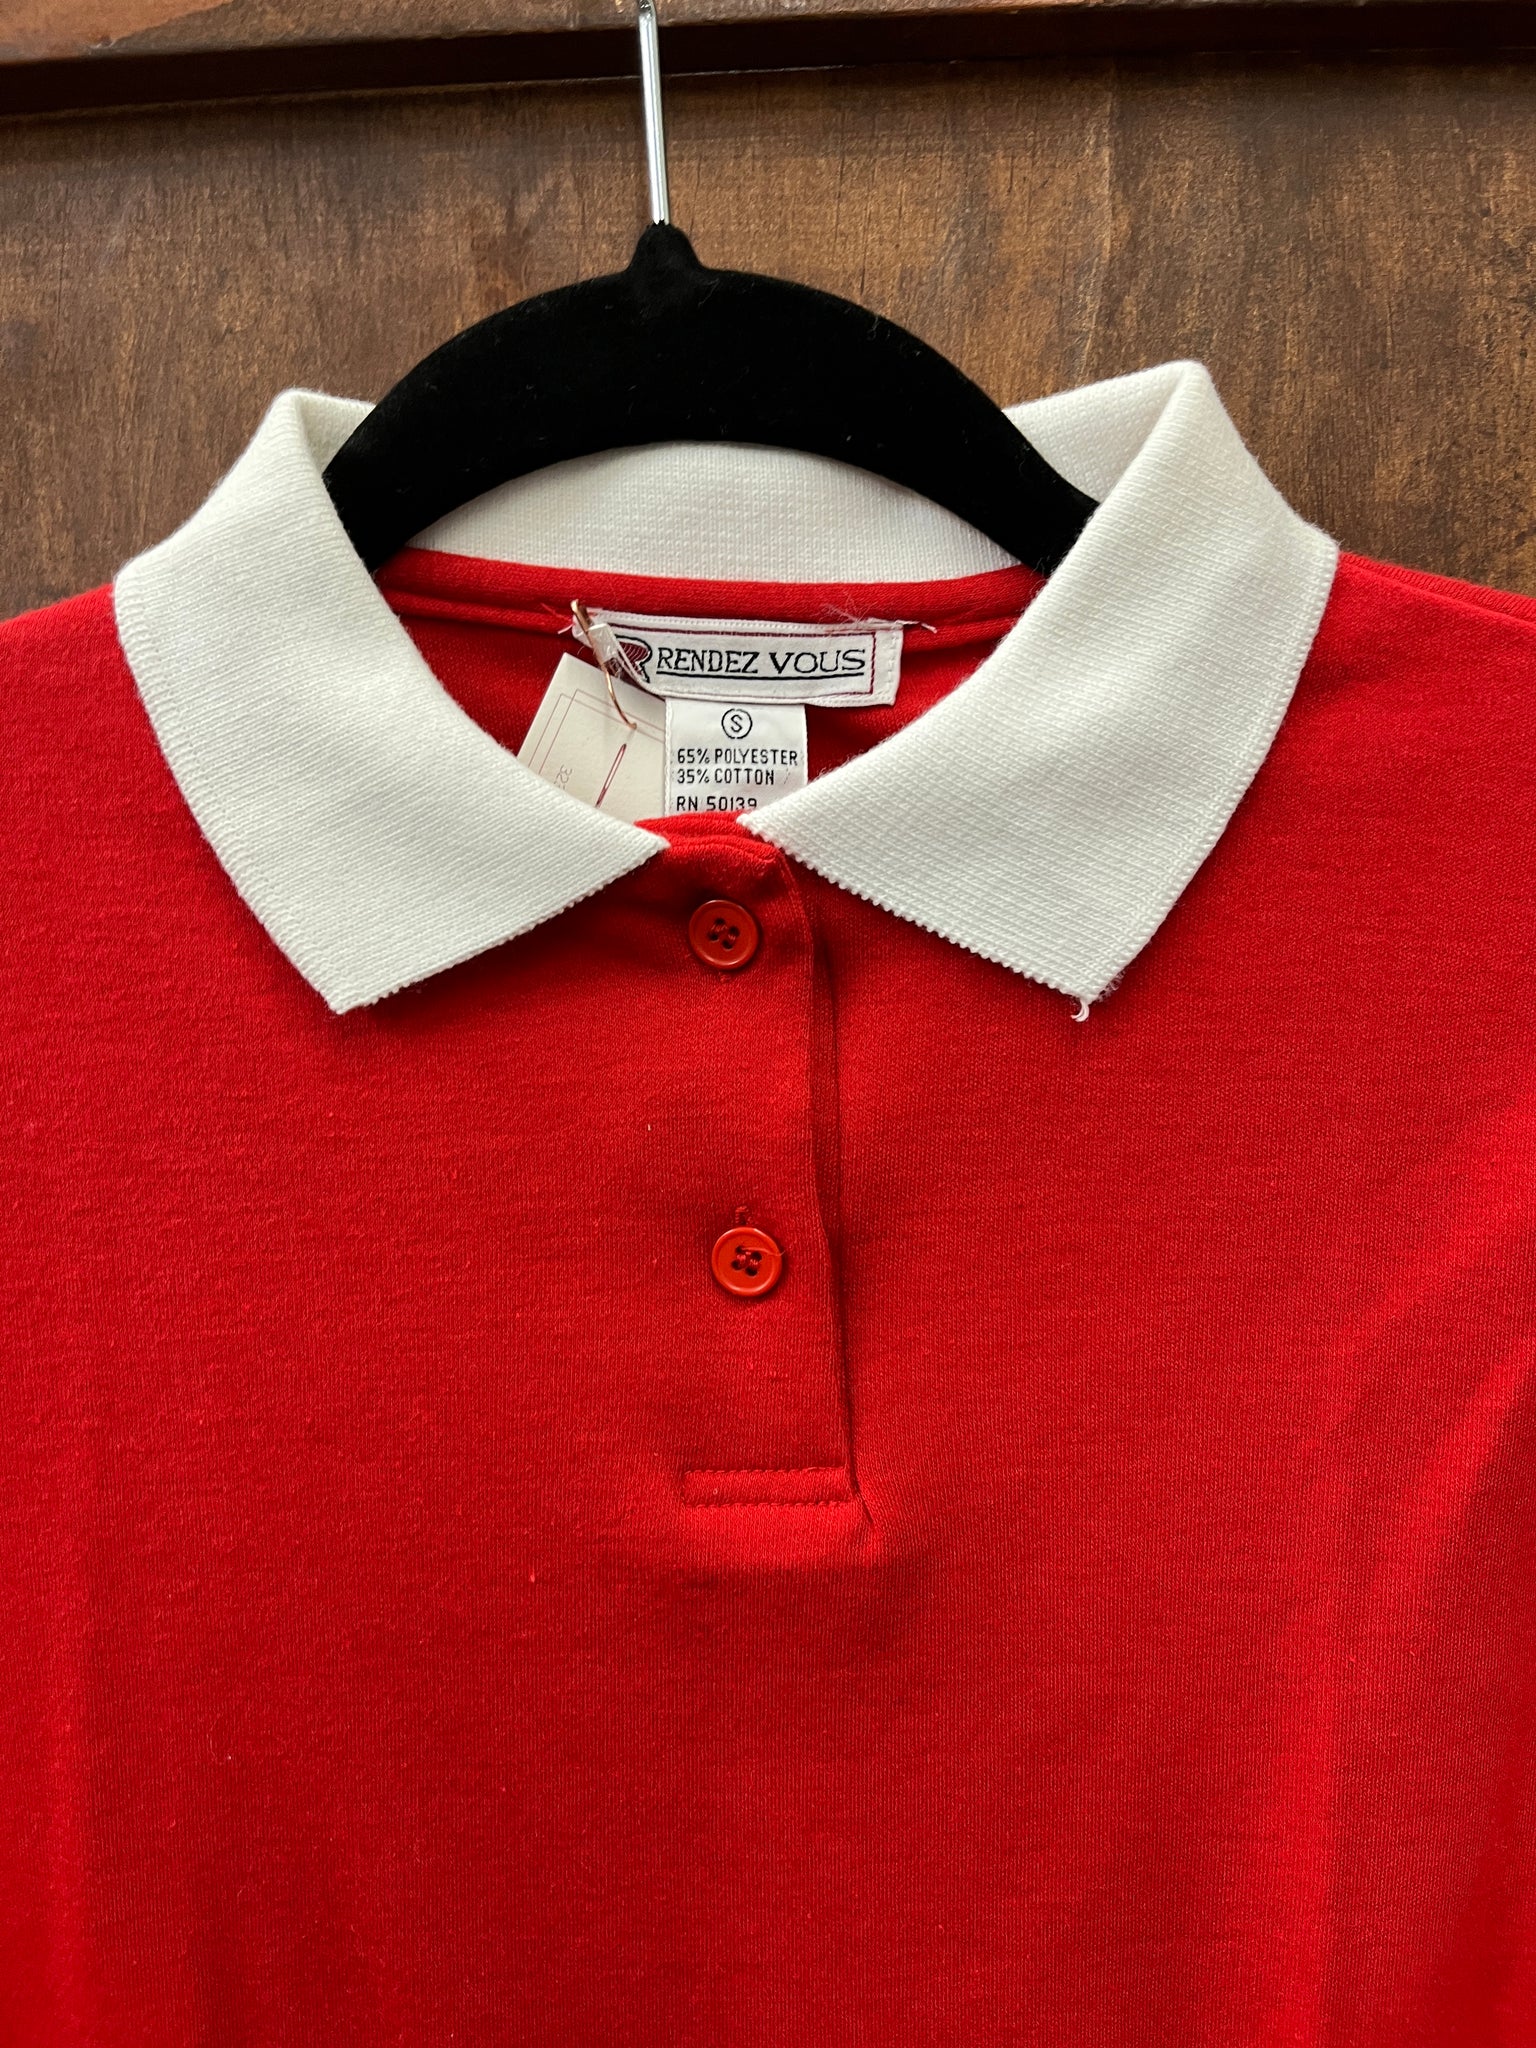 1980s TSHIRT- Polo-Rendez Vous- cherry red white collar